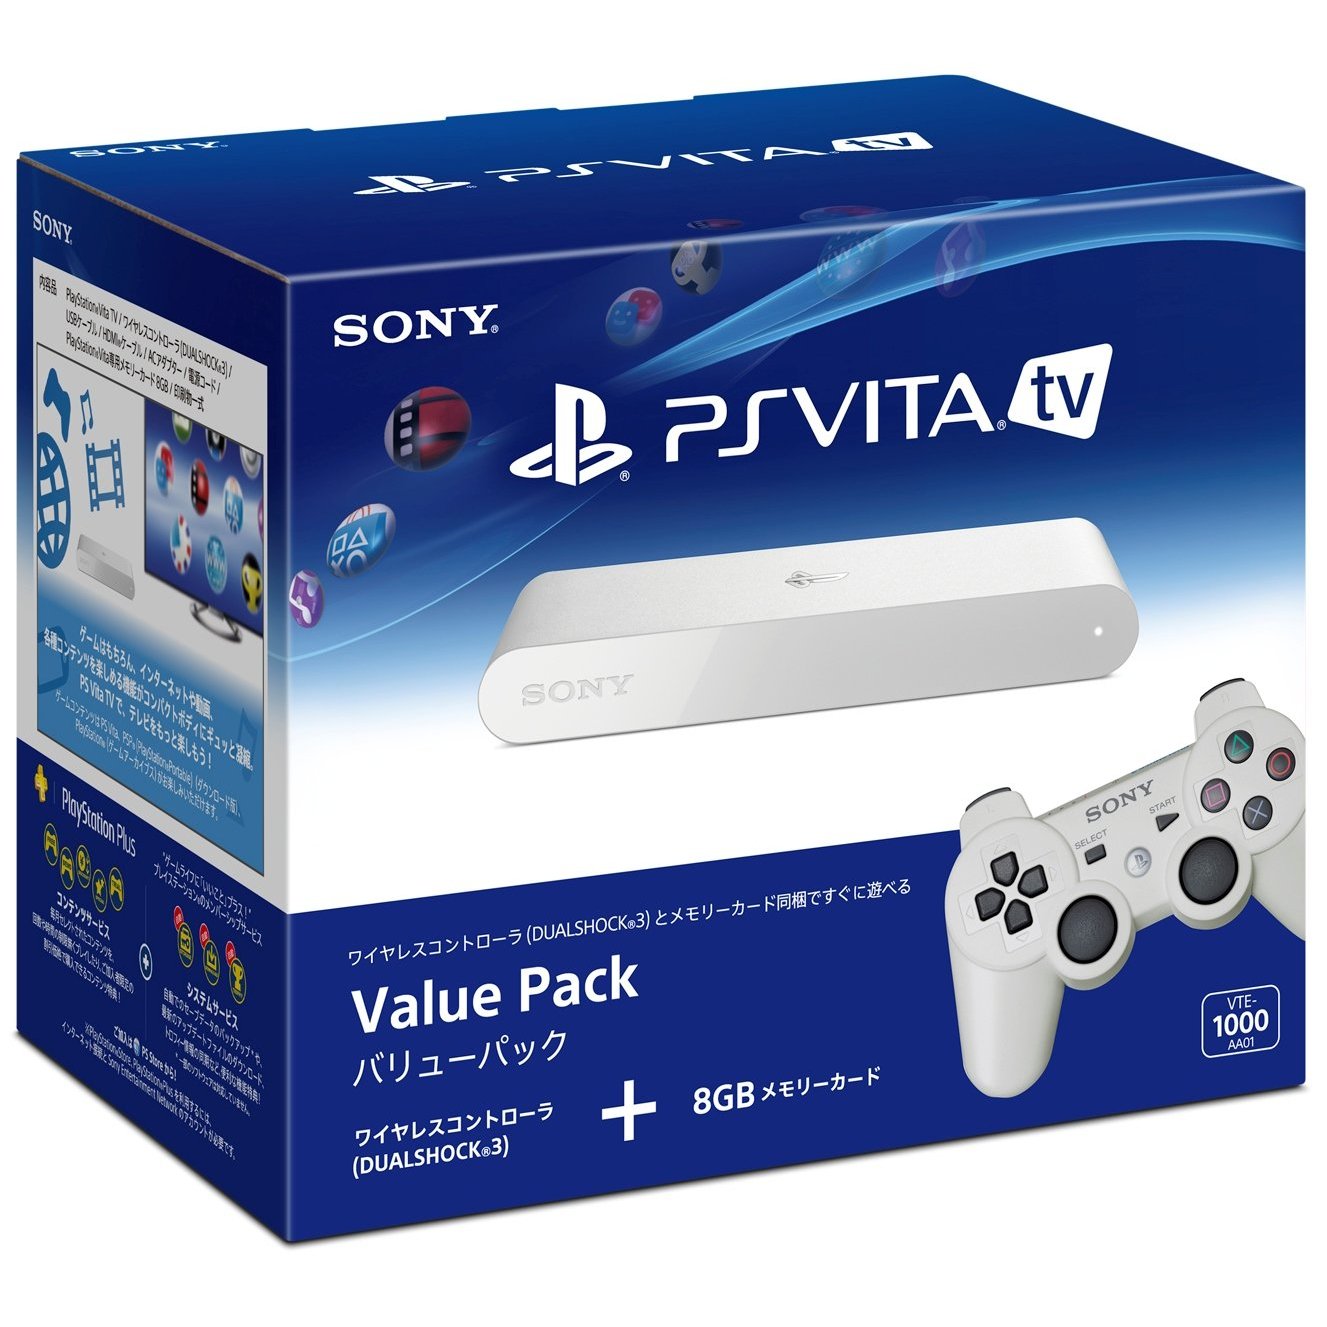 PS Vita Roundup: Check out the packing and content of PlayStation Vita TV